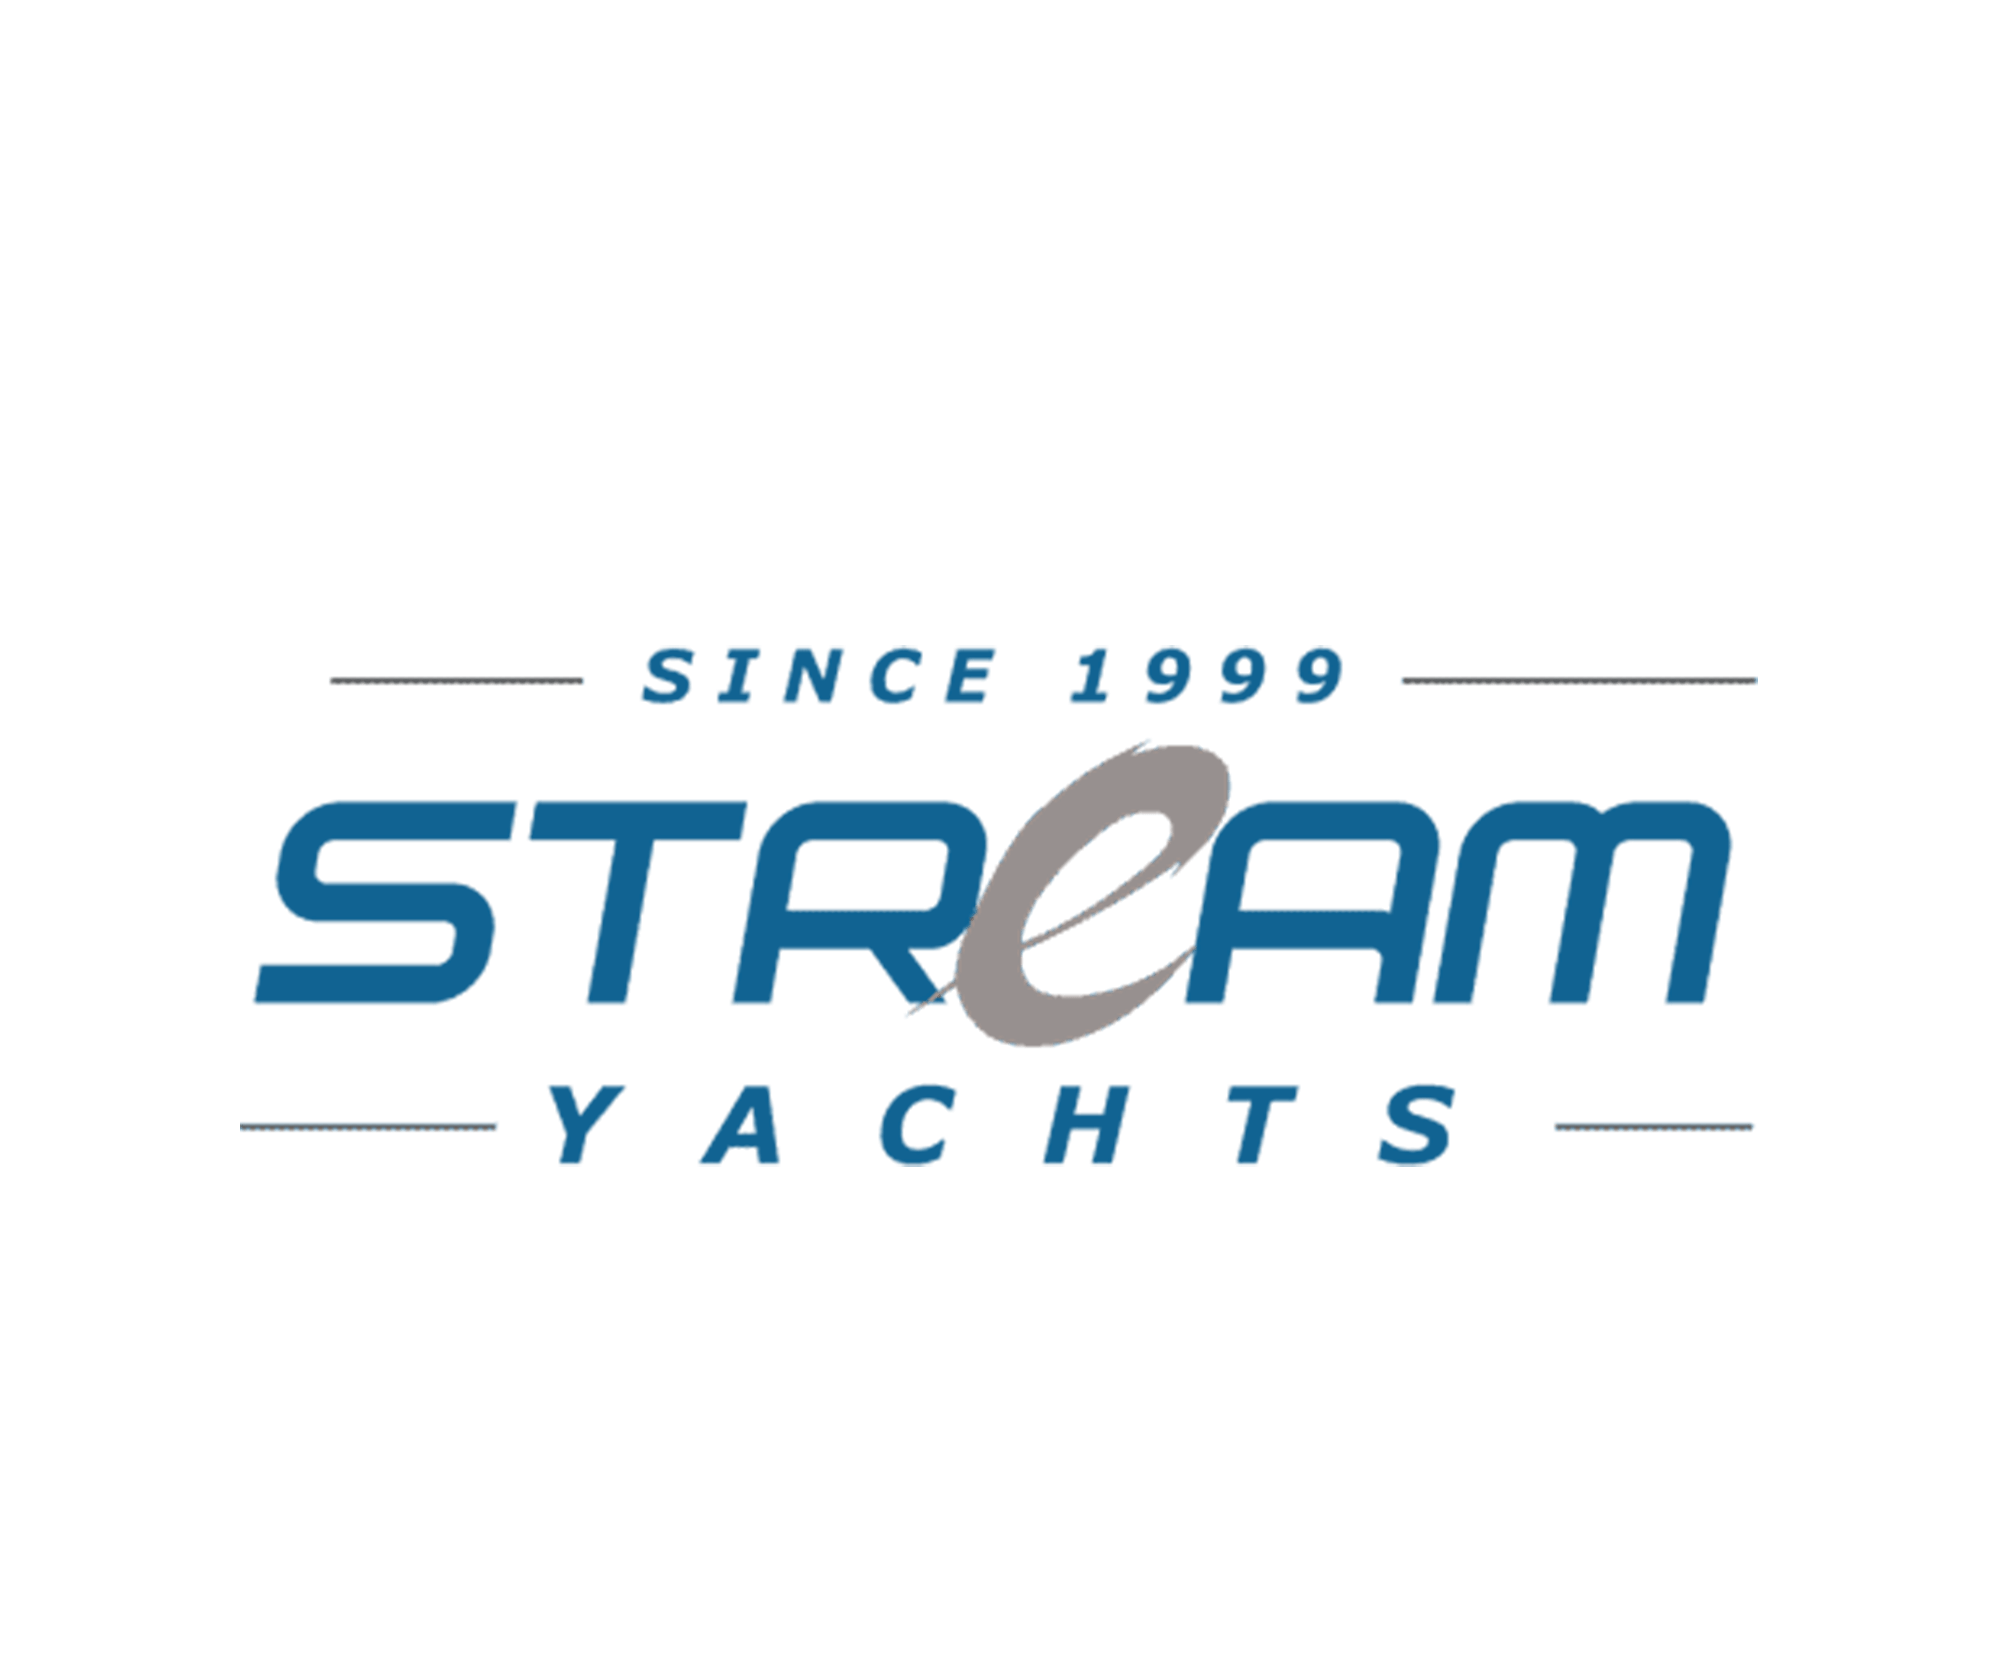 Located in Israel, Stream Yachts collaborates with Multicats International.